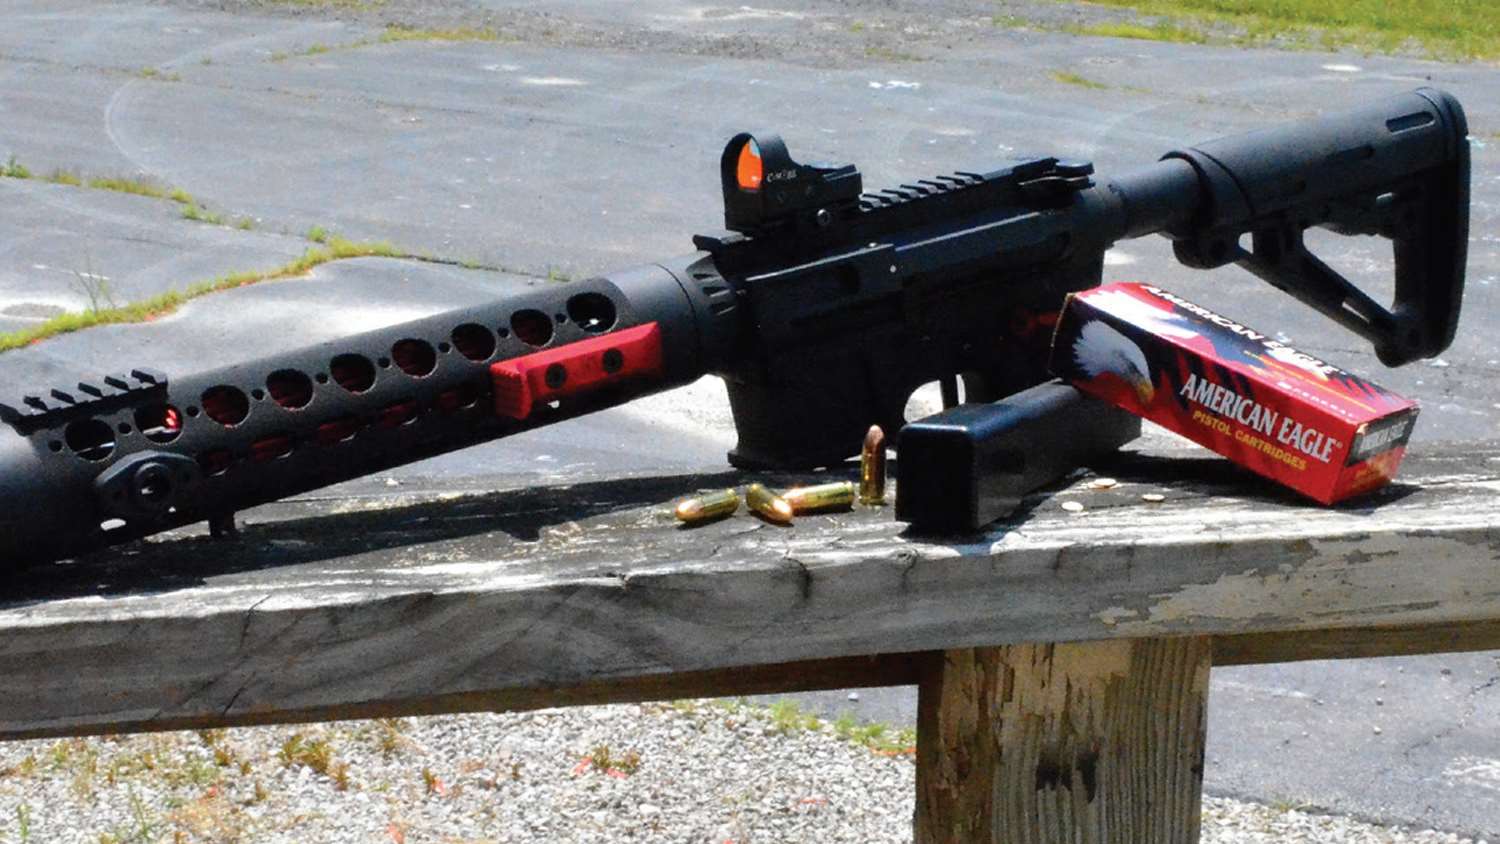 GMR-15 9mm and American Eagle ammo